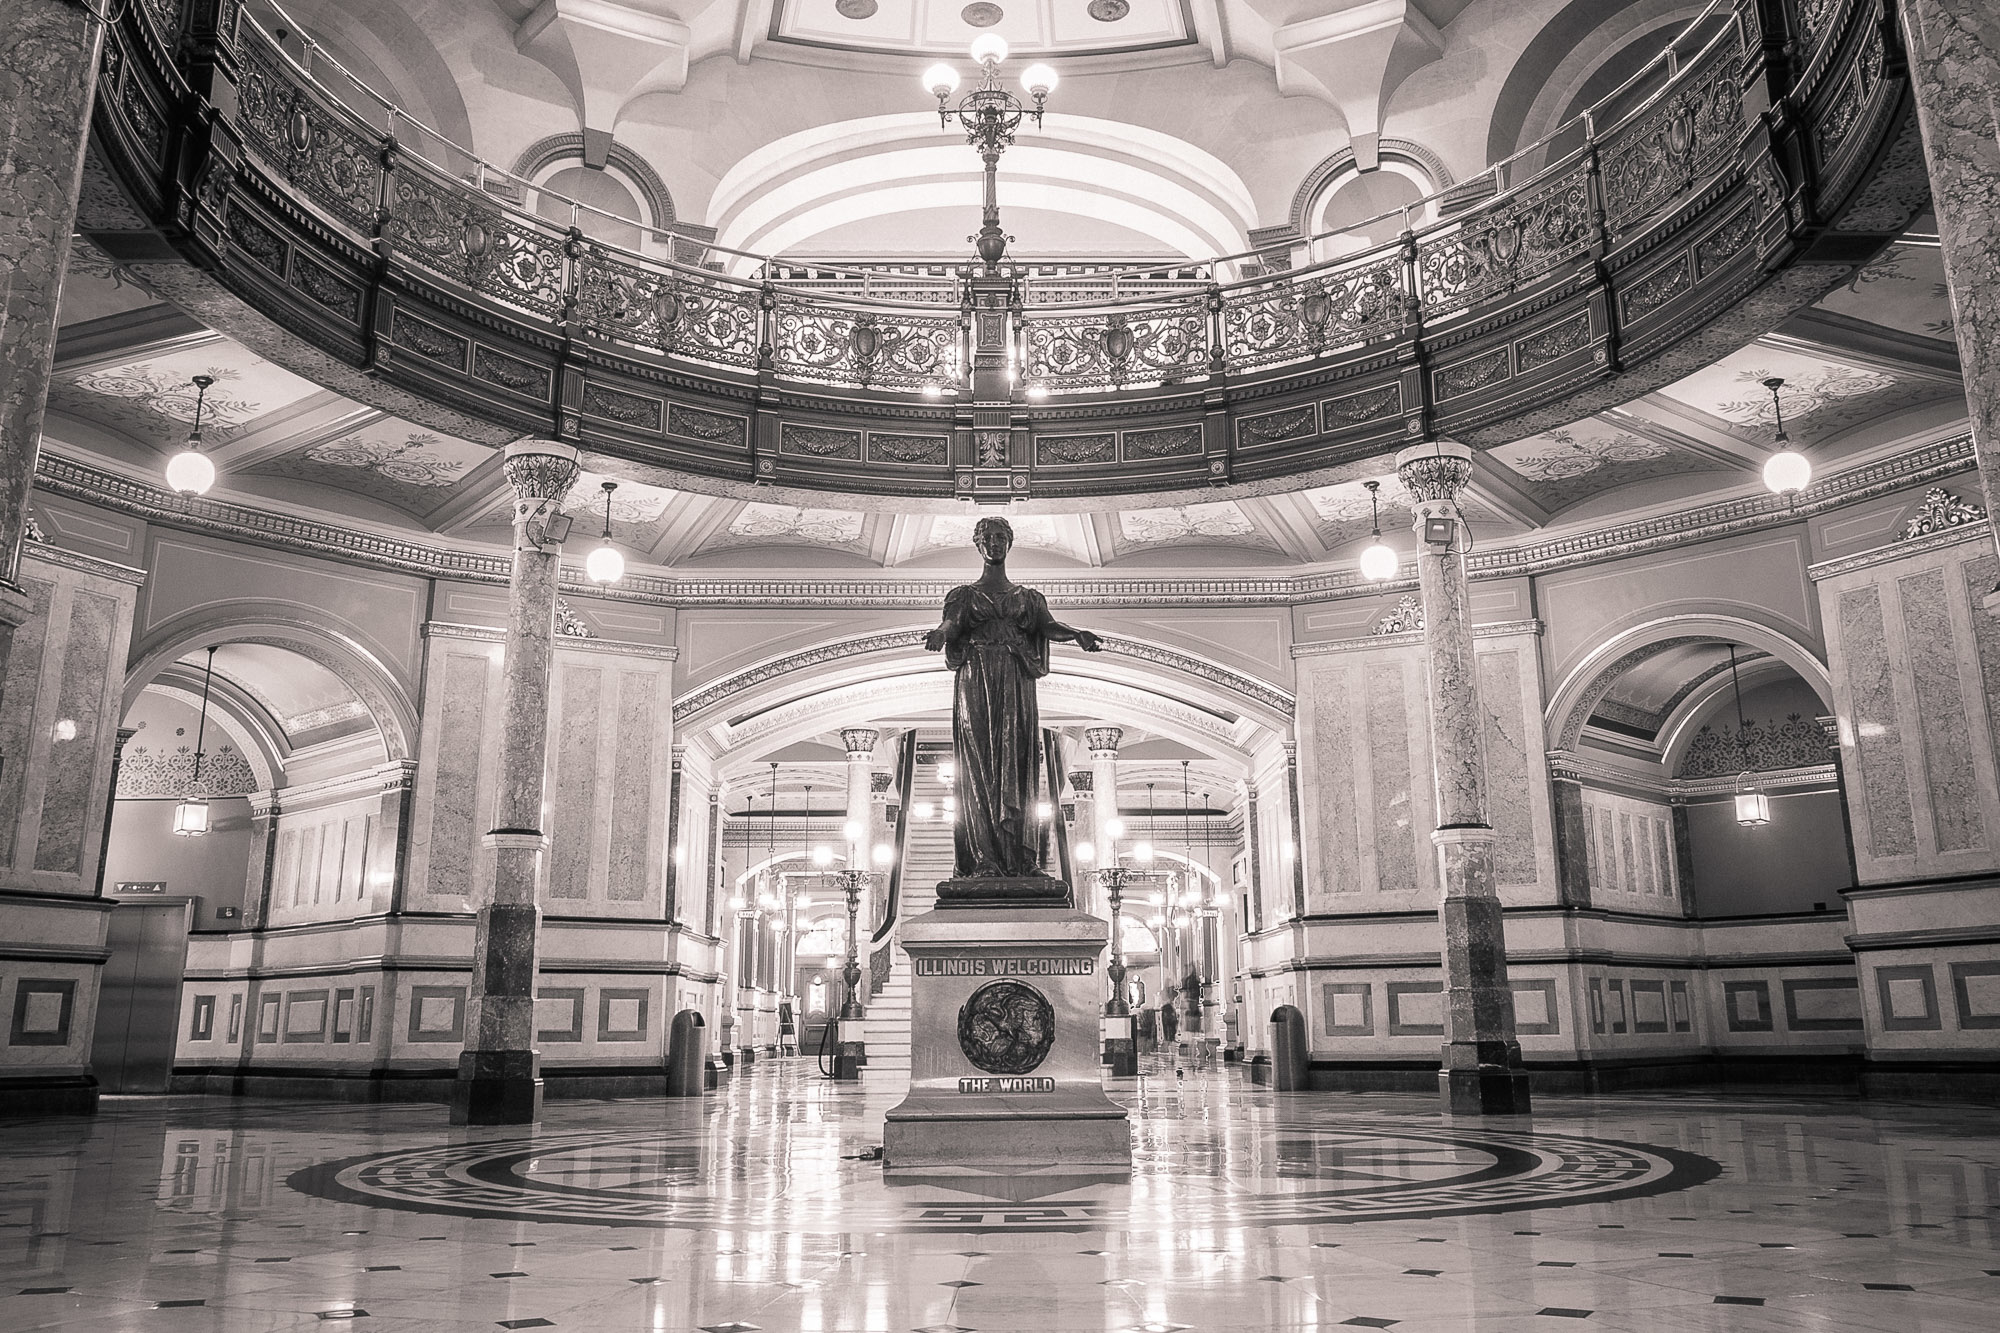 Illinois State Capital. Photo copyright Miceli Productions. http://MiceliProductions.com